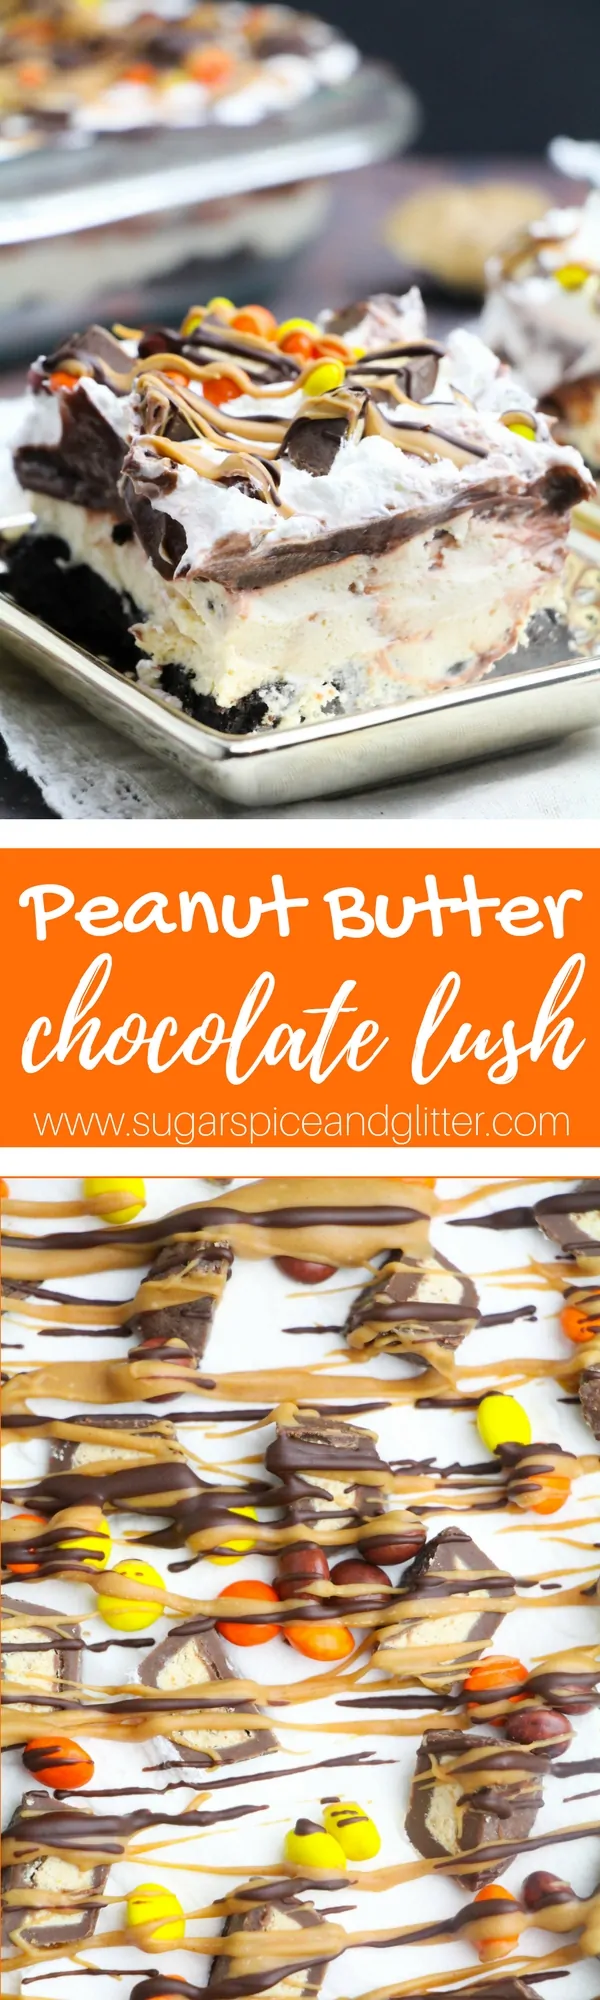 Peanut Butter Chocolate Lush, the ultimate no bake chocolate lasagna recipe for peanut butter-chocolate fans